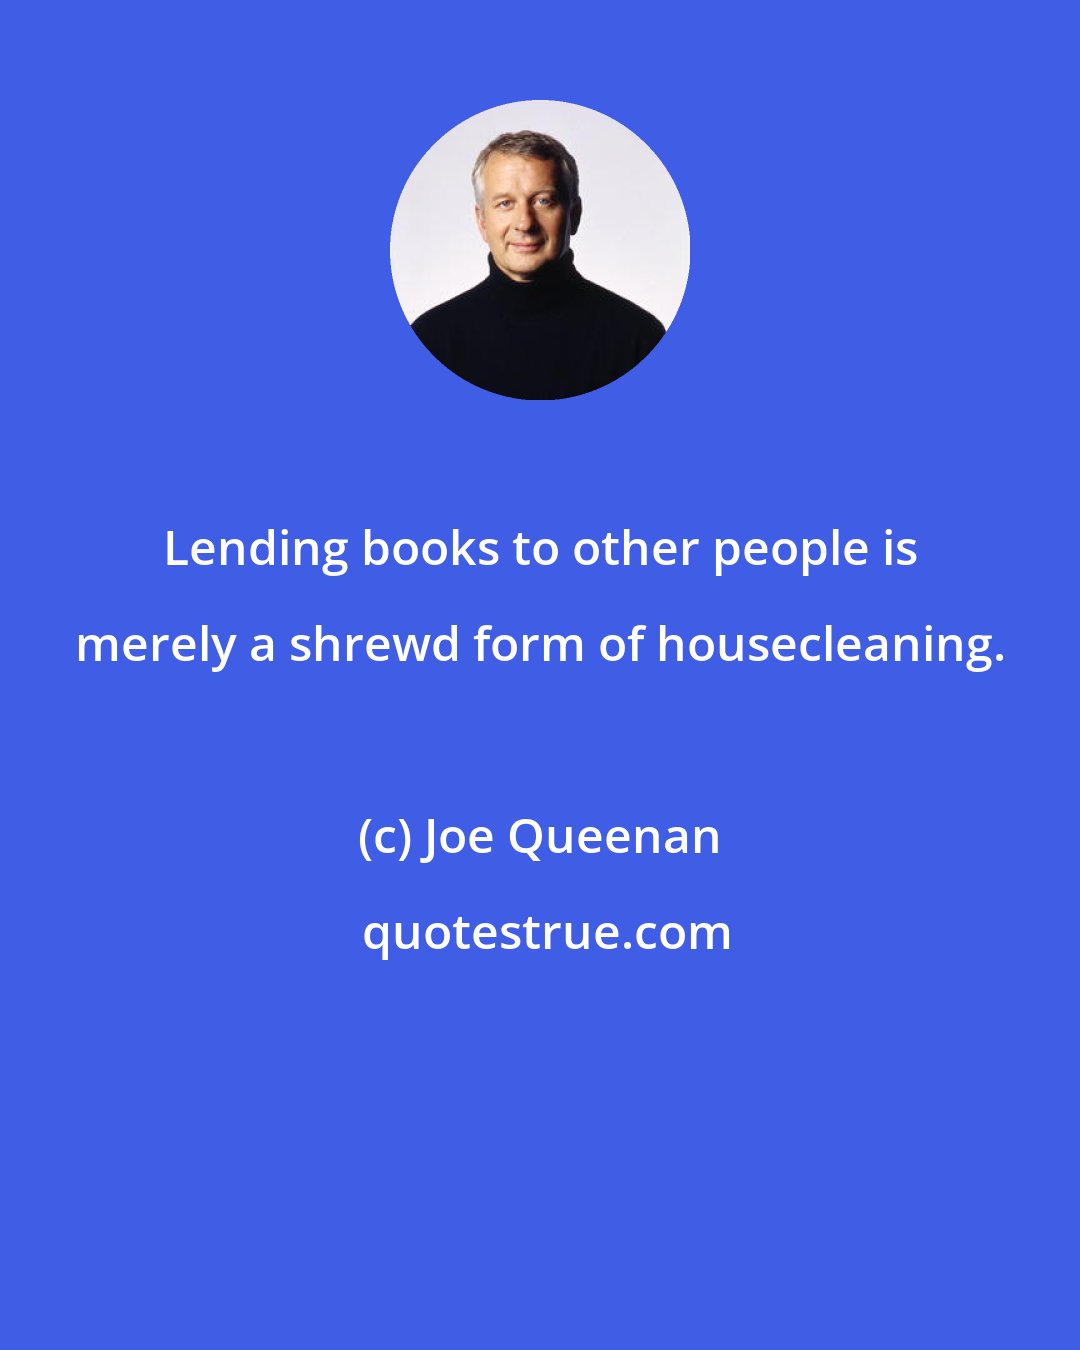 Joe Queenan: Lending books to other people is merely a shrewd form of housecleaning.